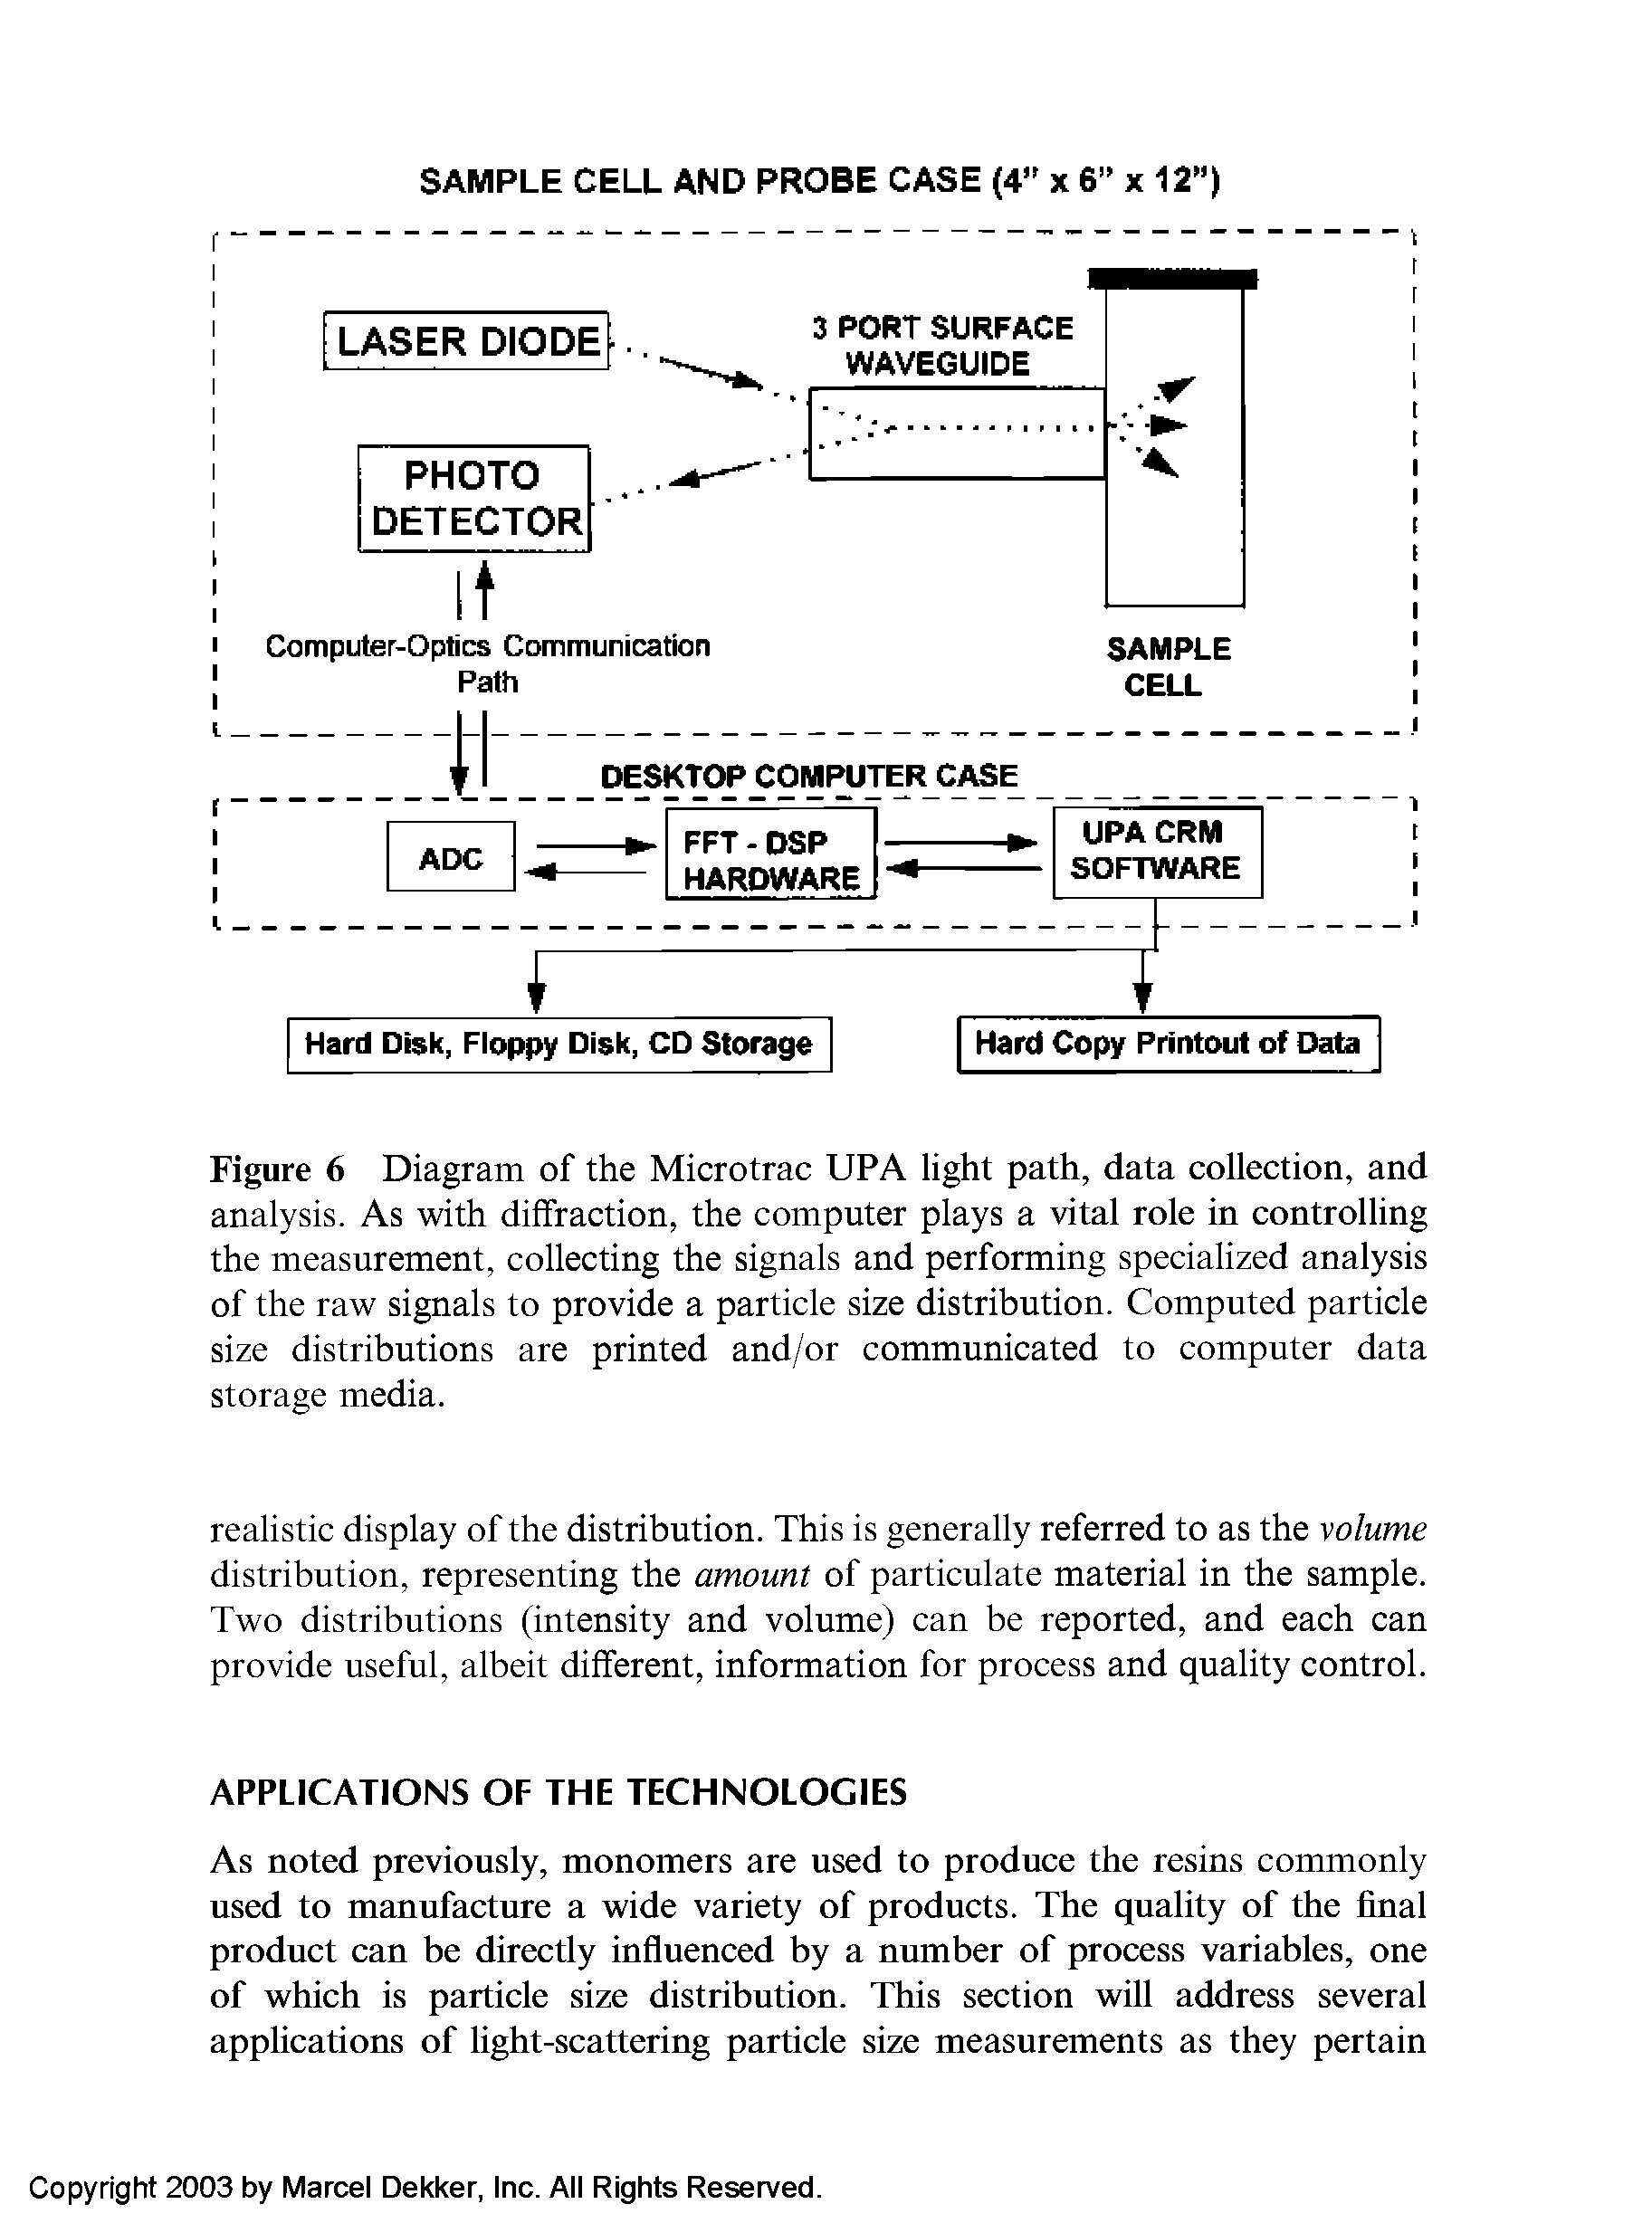 Figure 6 Diagram of the Microtrac UFA light path, data collection, and analysis. As with diffraction, the computer plays a vital role in controlling the measurement, collecting the signals and performing specialized analysis of the raw signals to provide a particle size distribution. Computed particle size distributions are printed and/or communicated to computer data storage media.